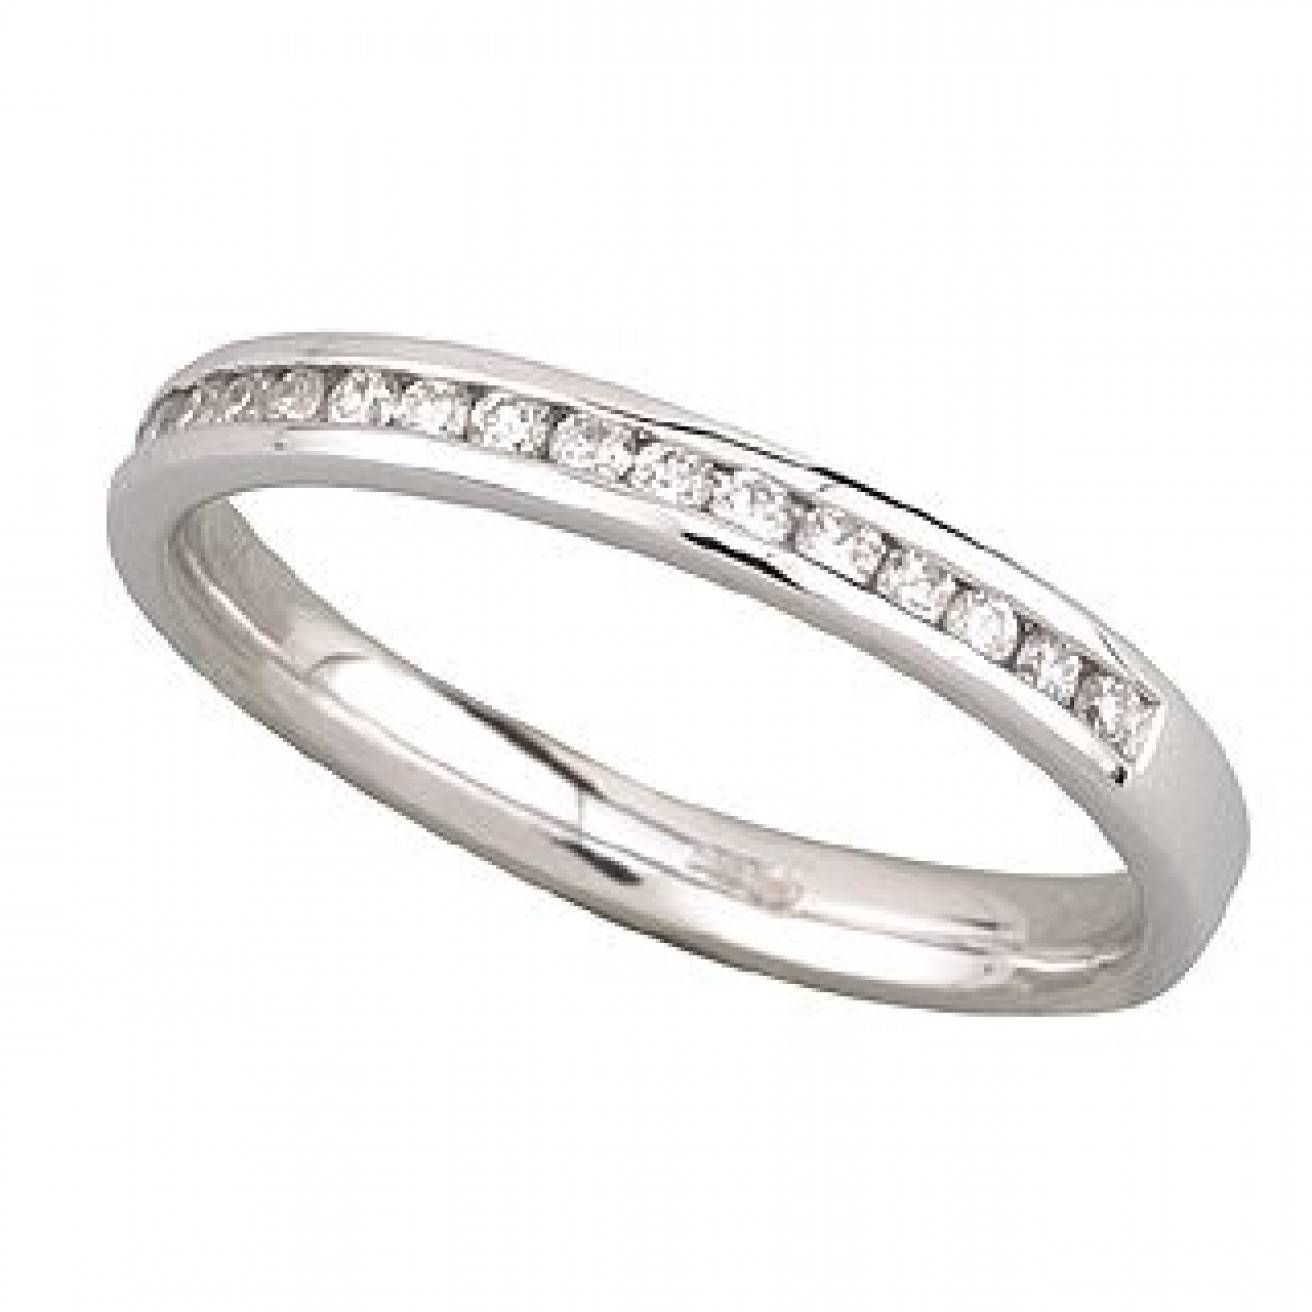 Buy White Gold Wedding Rings Online – Fraser Hart Within Recent Gold And White Gold Wedding Bands (View 5 of 15)